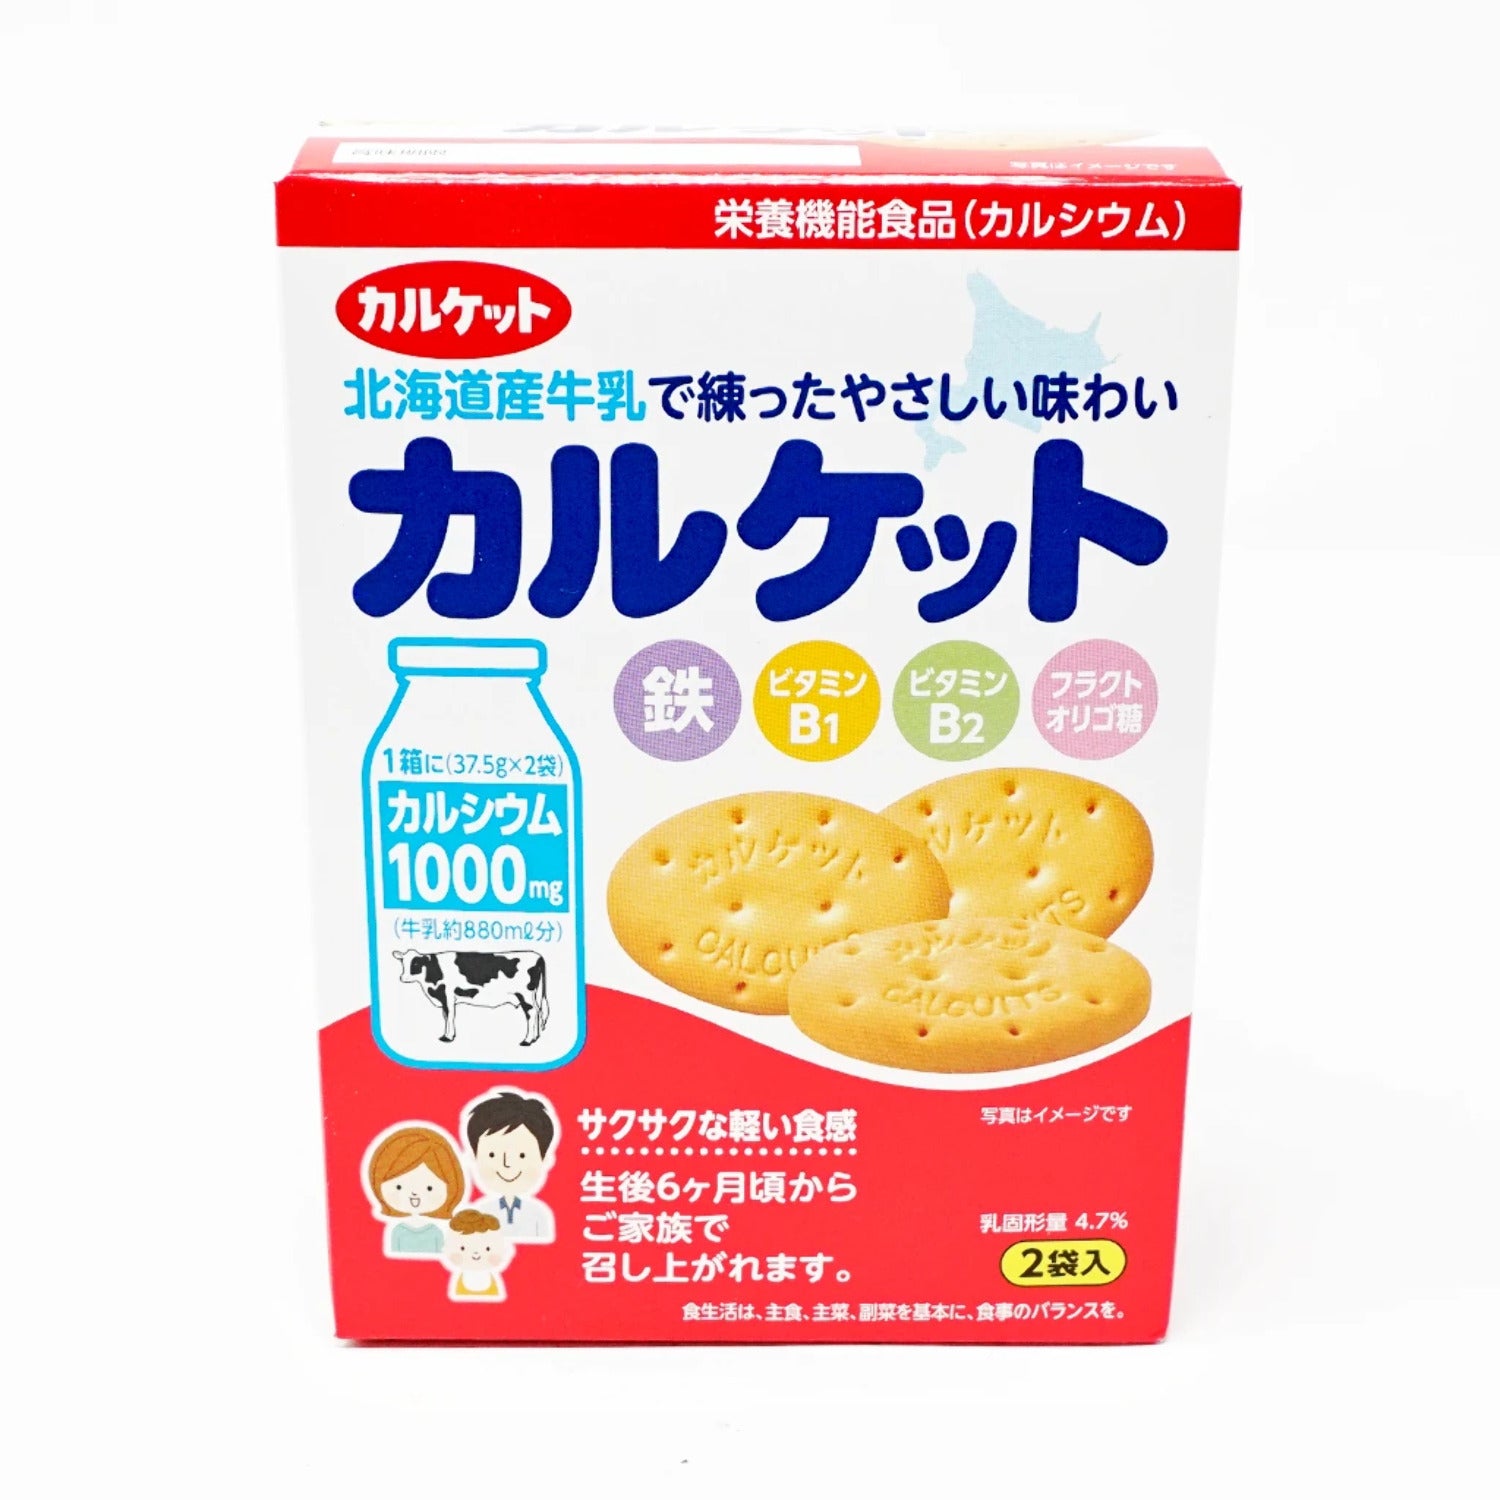 Ito Seika Calcuits Baby Biscuits Wheat Cracker /75g